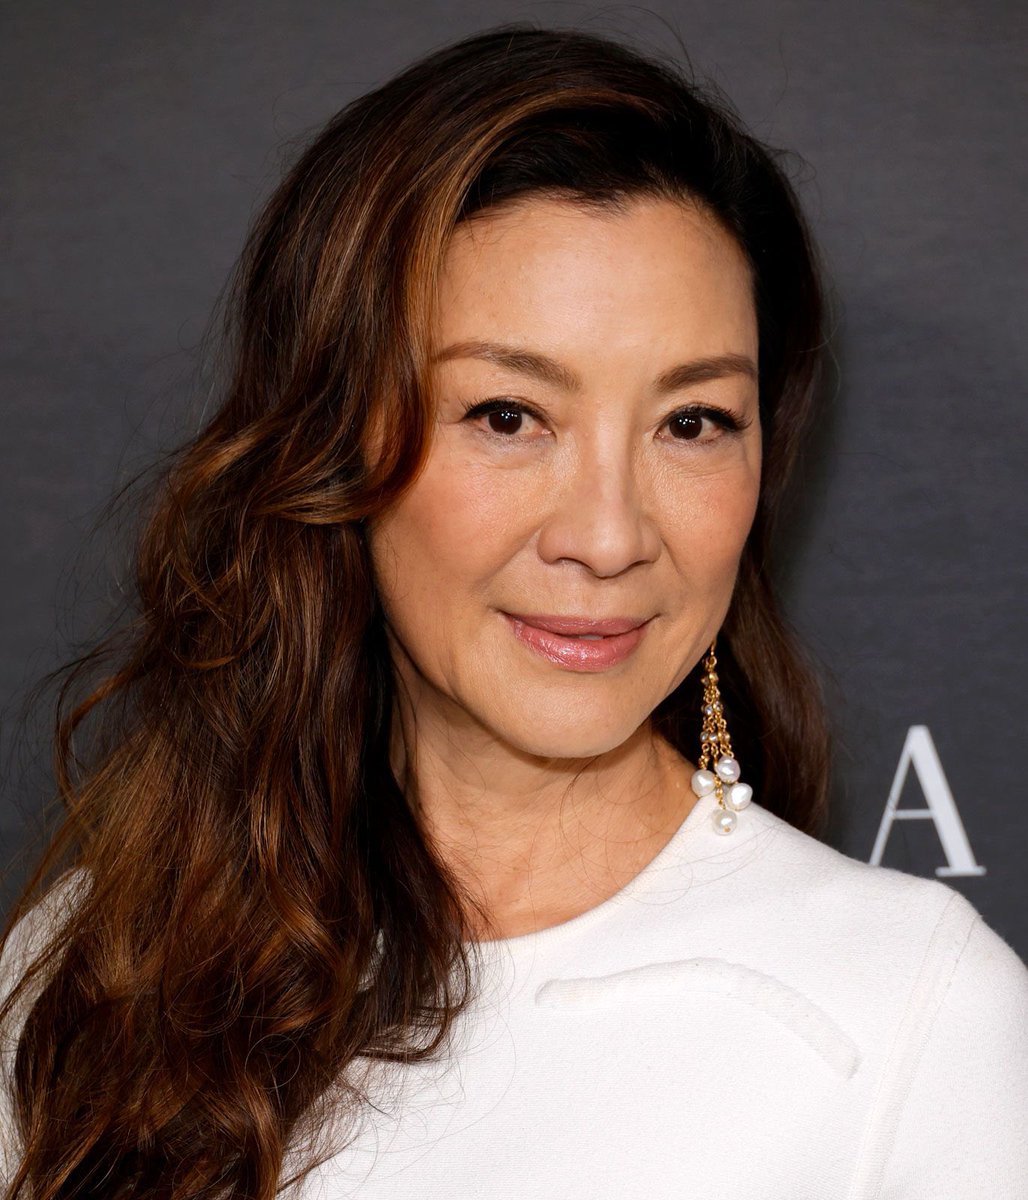 Actor #MichelleYeoh to receive a star on the Hollywood Walk of Fame. 💥💥